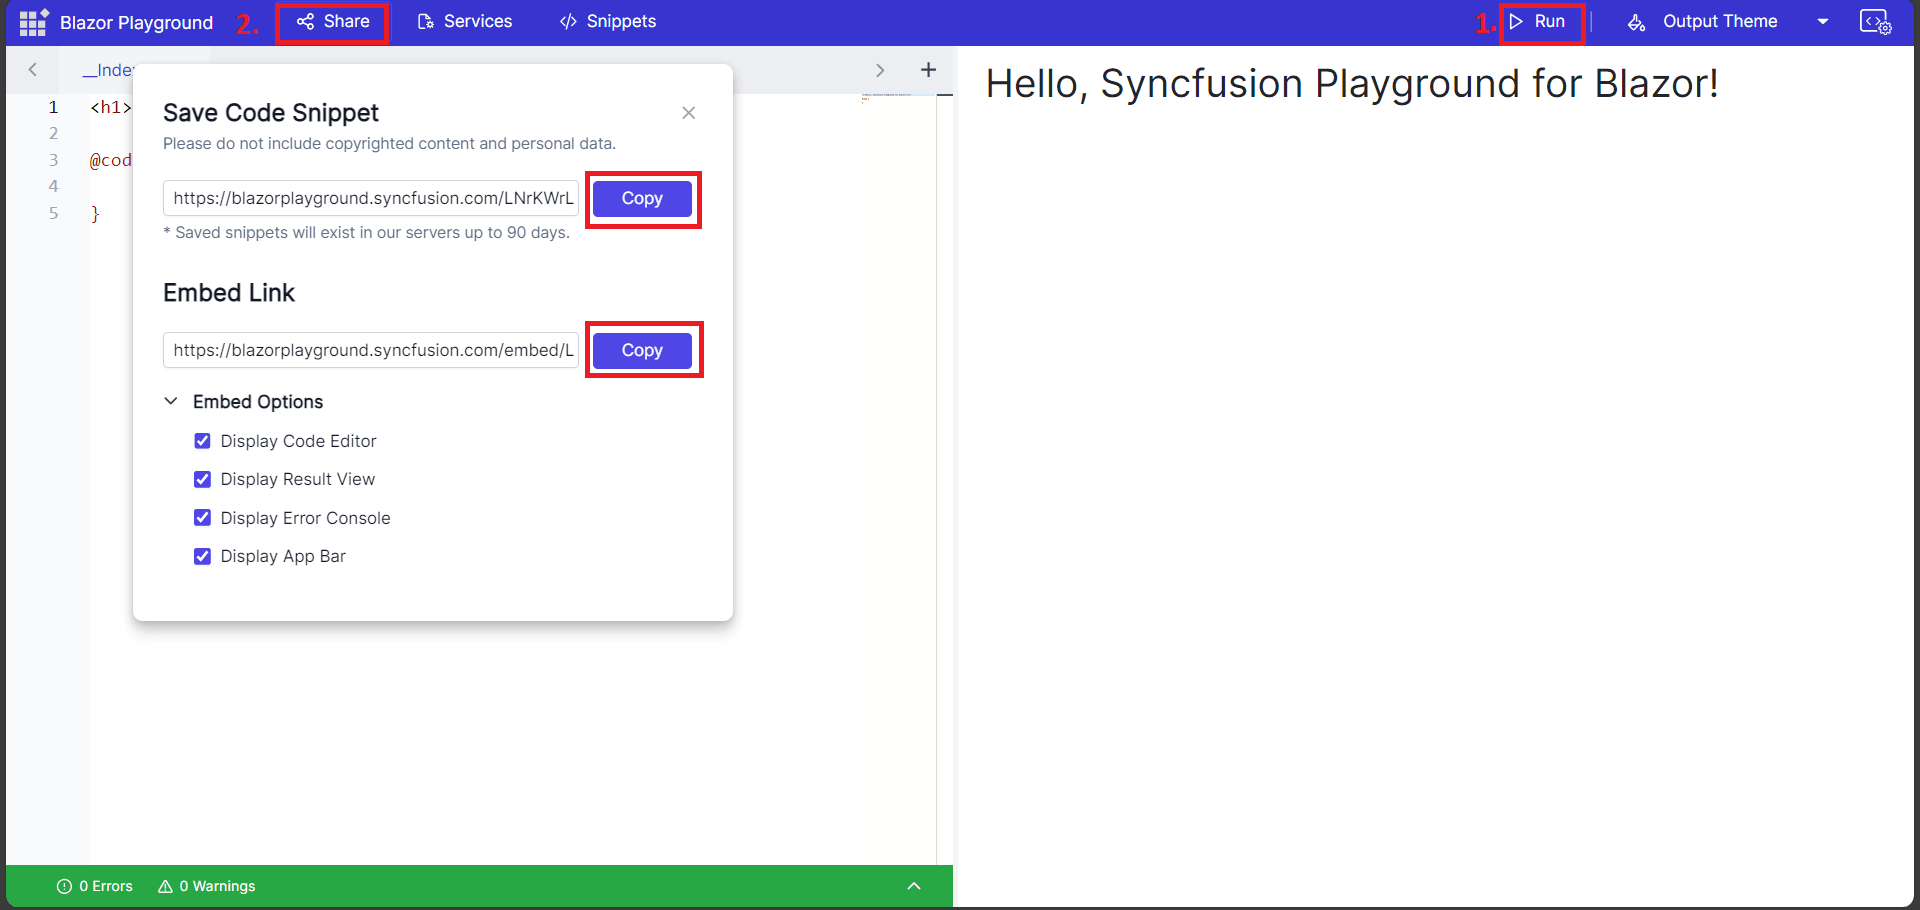 Syncfusion Blazor Playground with save code snippet